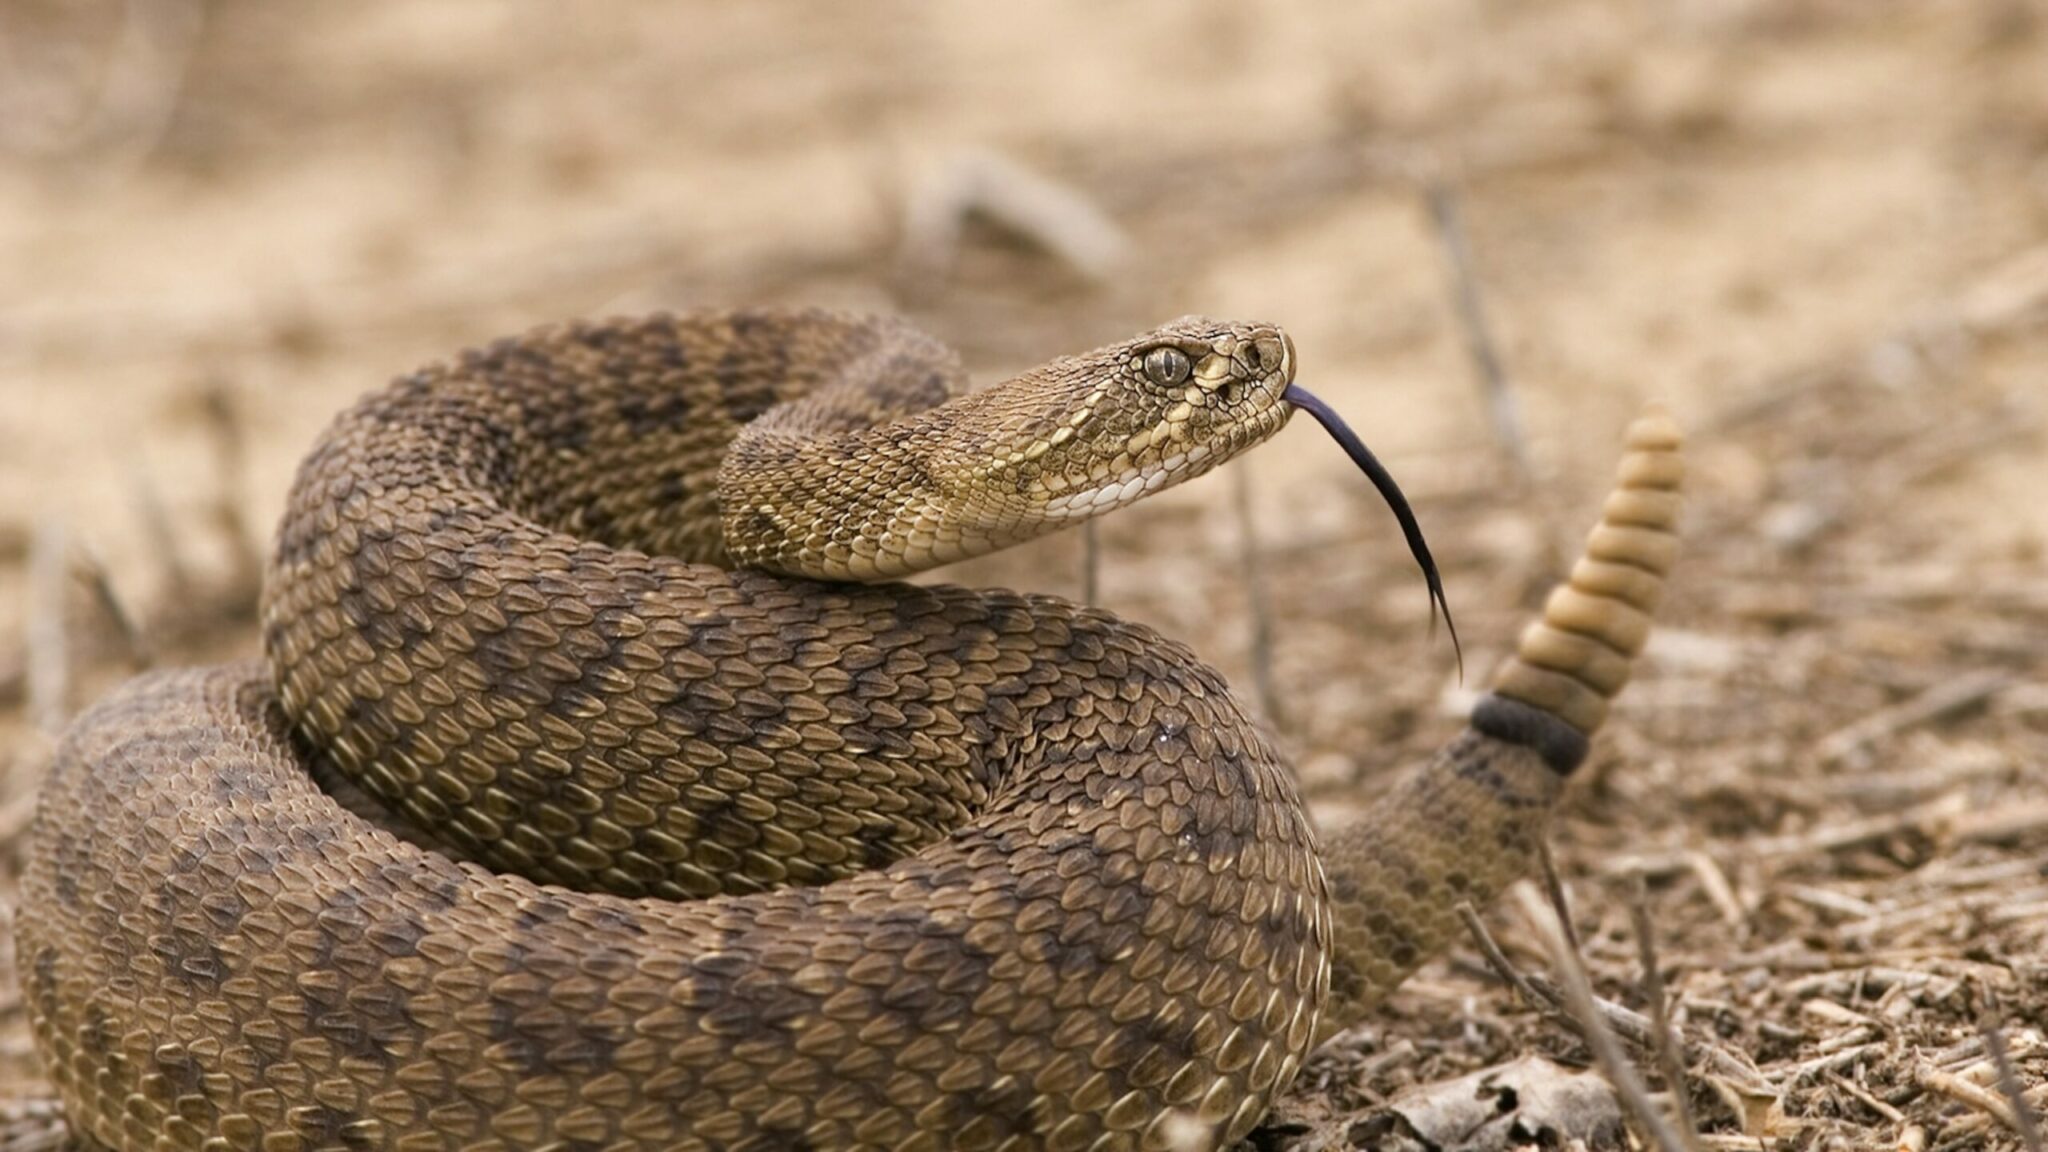 how does a rattlesnake make the rattle sound with its rattle and what does it mean